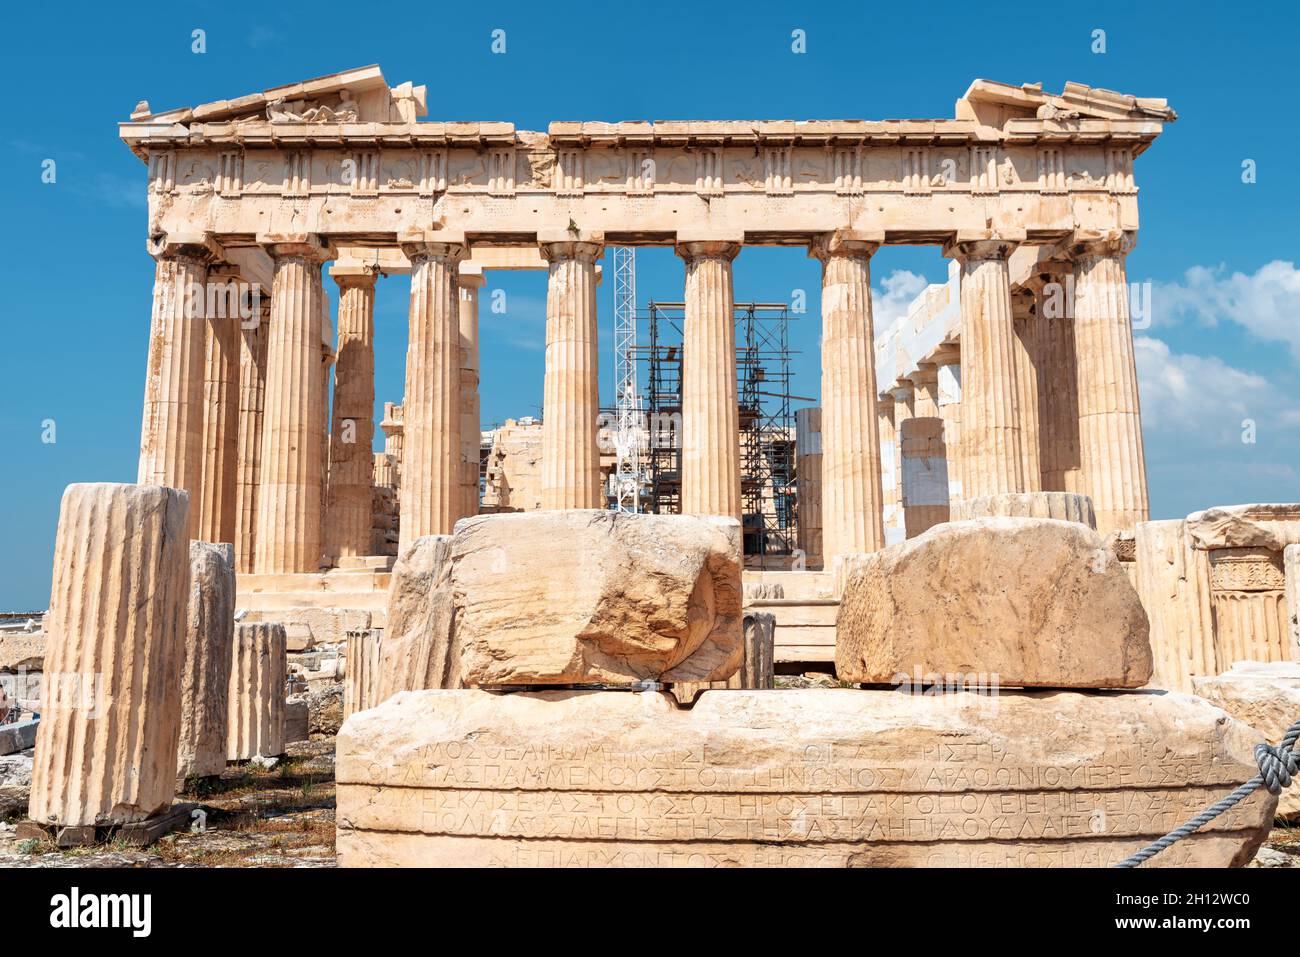 Parthenon temple on Acropolis, Athens, Greece. It is famous landmark of Athens. Ruins of Ancient Greek building in Athens city center. View of classic Stock Photo